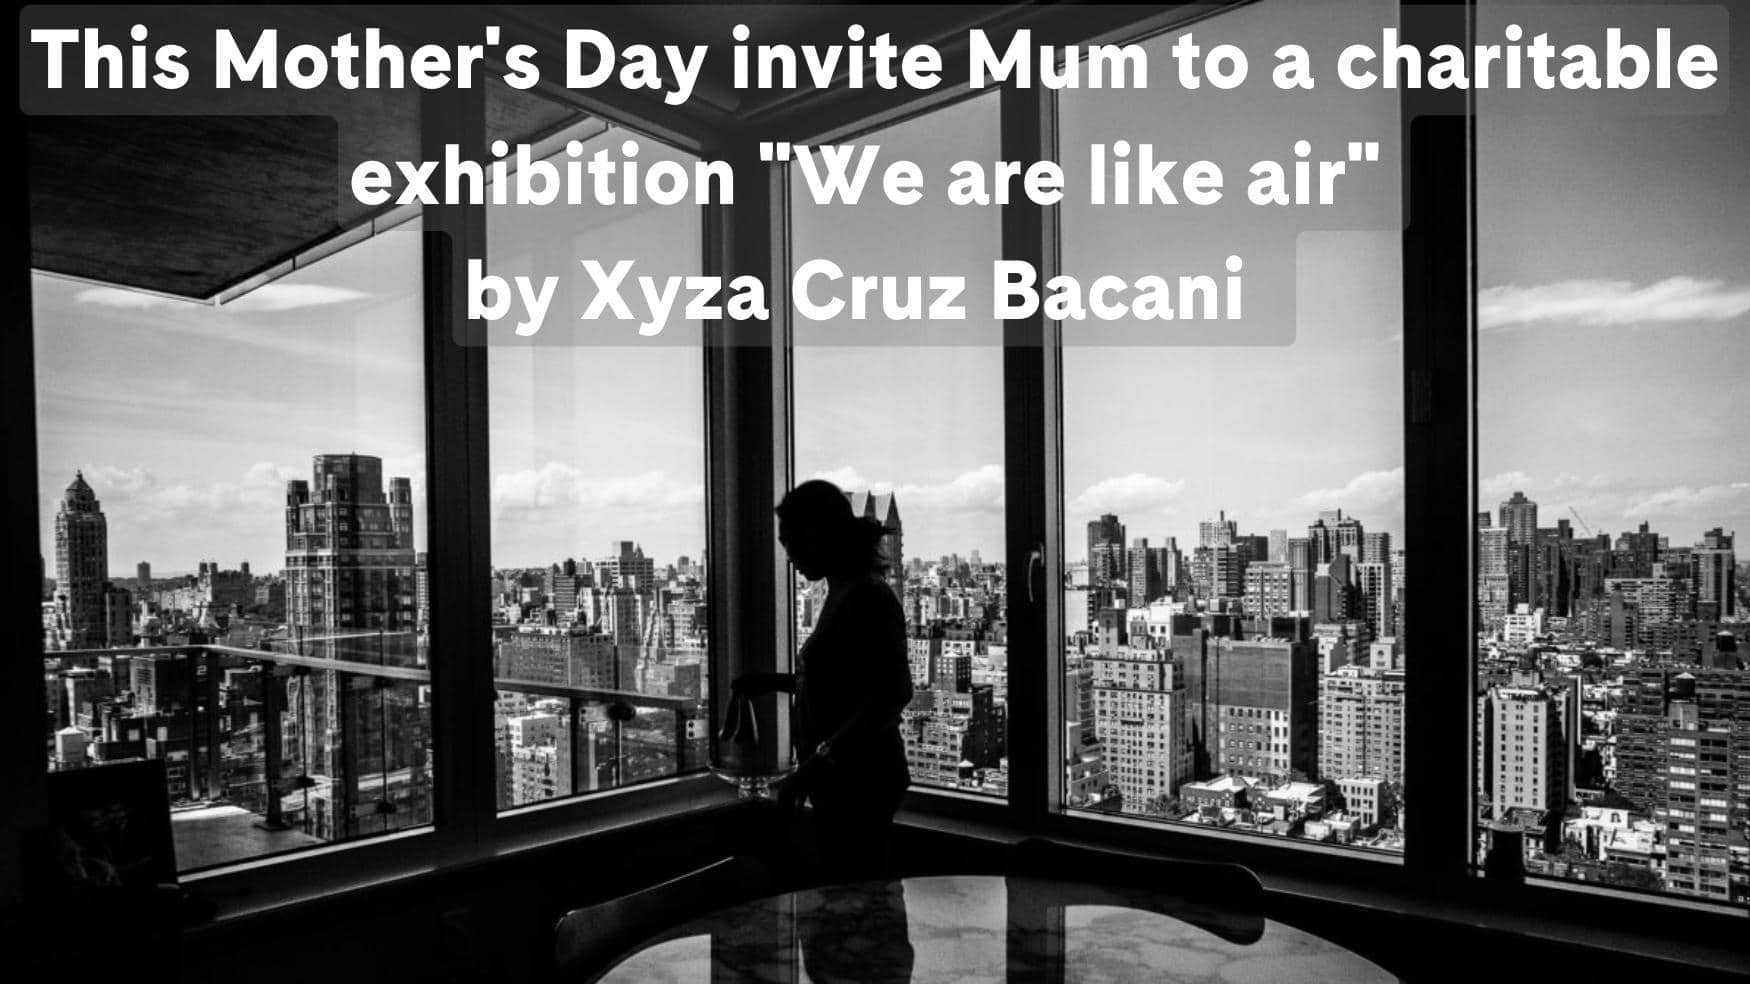 This Mother's Day invite Mum to a charitable exhibition "We are like air" by Xyza Cruz Bacani